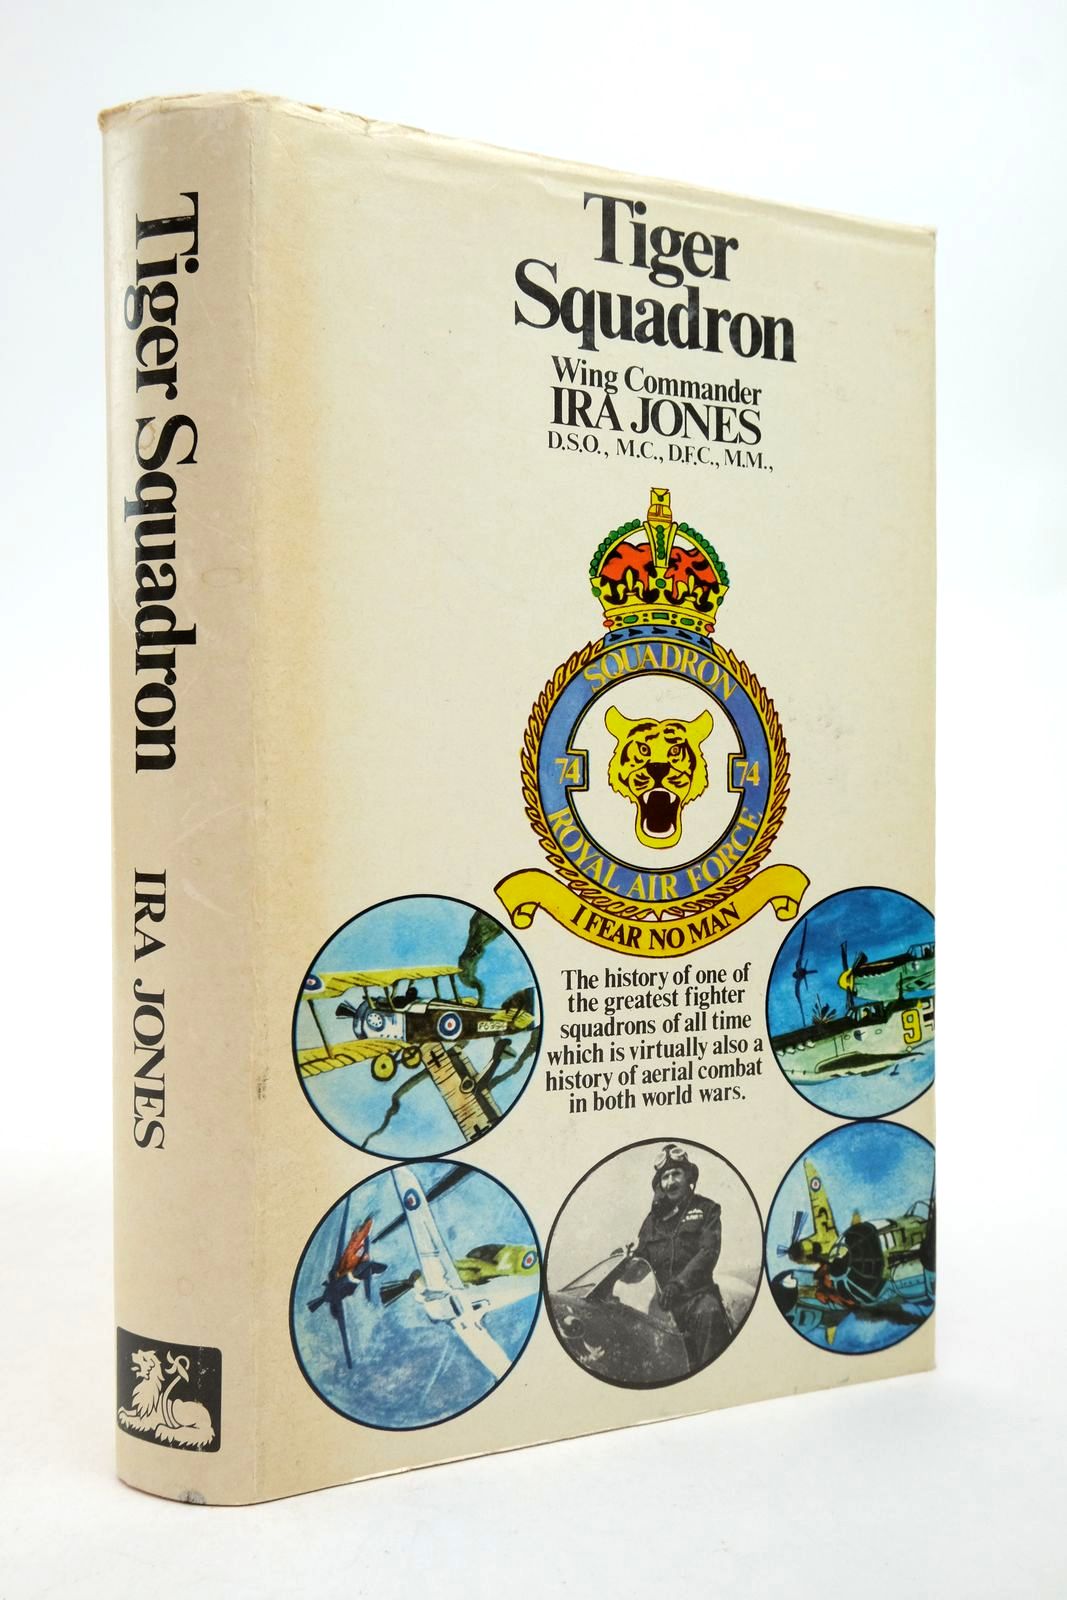 Photo of TIGER SQUADRON written by Jones, Ira published by White Lion Publishers Limited (STOCK CODE: 2139809)  for sale by Stella & Rose's Books